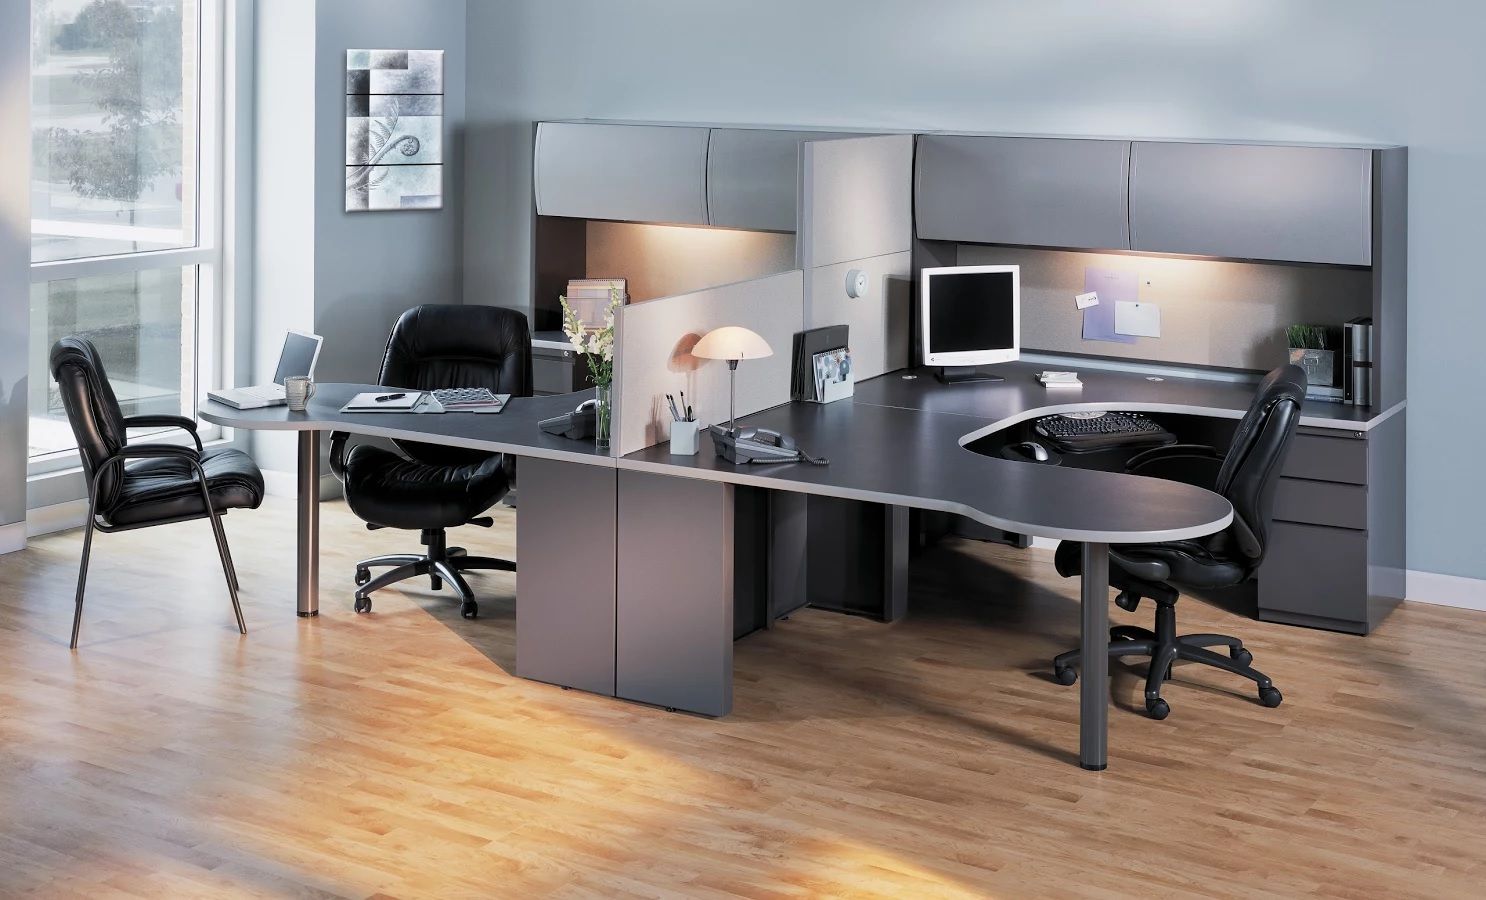 http://gsa.theofficeleader.com/content/images/thumbs/0071348_2-person-u-shape-office-desk-workstation-with-filing-and-overhead-storage.jpeg